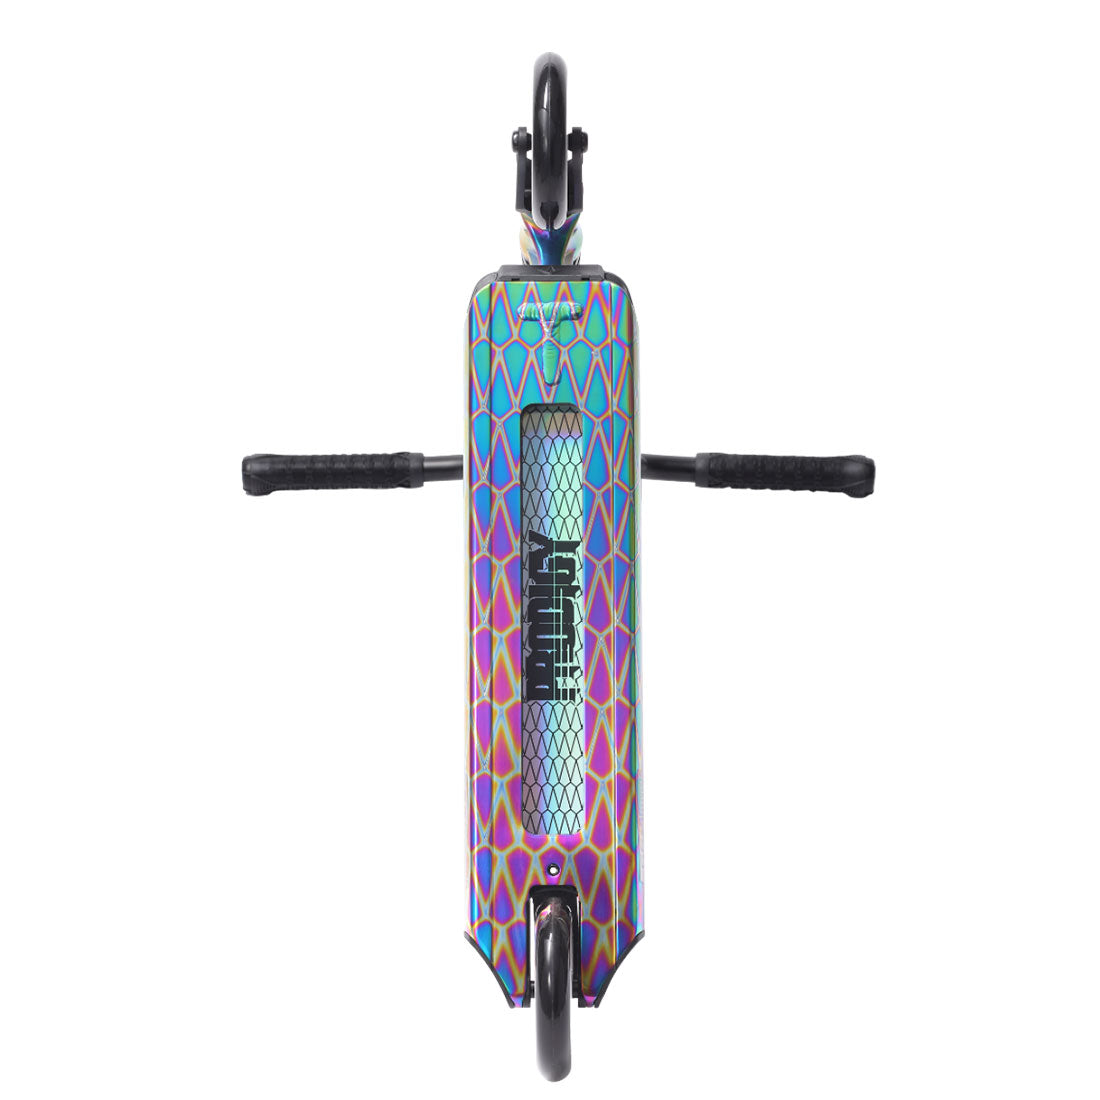 Envy Prodigy S9 Complete - Oil Slick Scooter Completes Trick